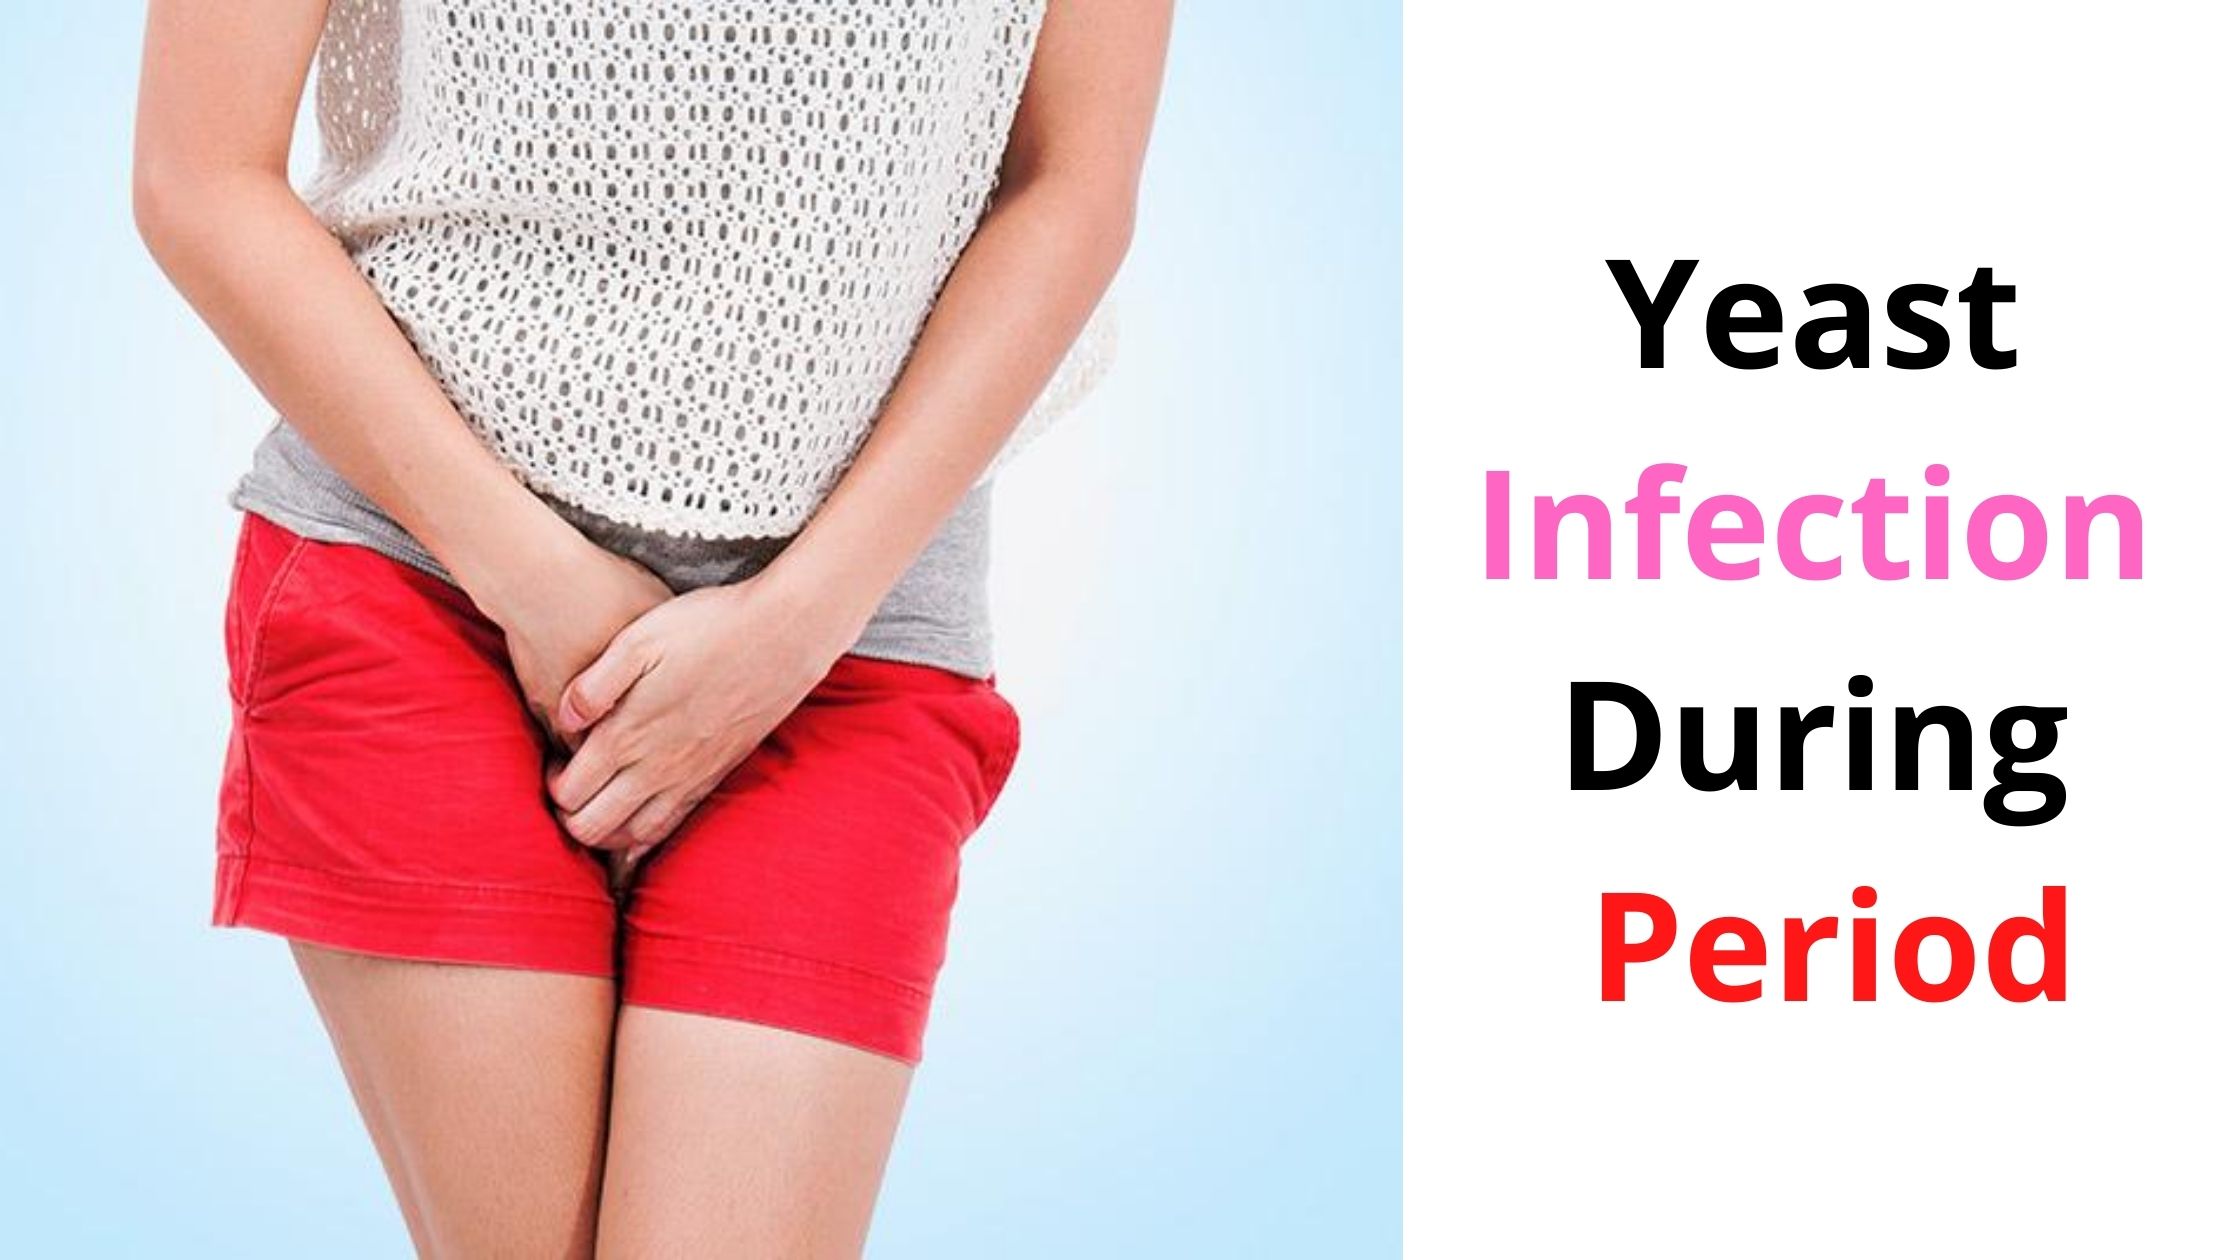 Yeast Infection During Period Causes Symptoms Treatments